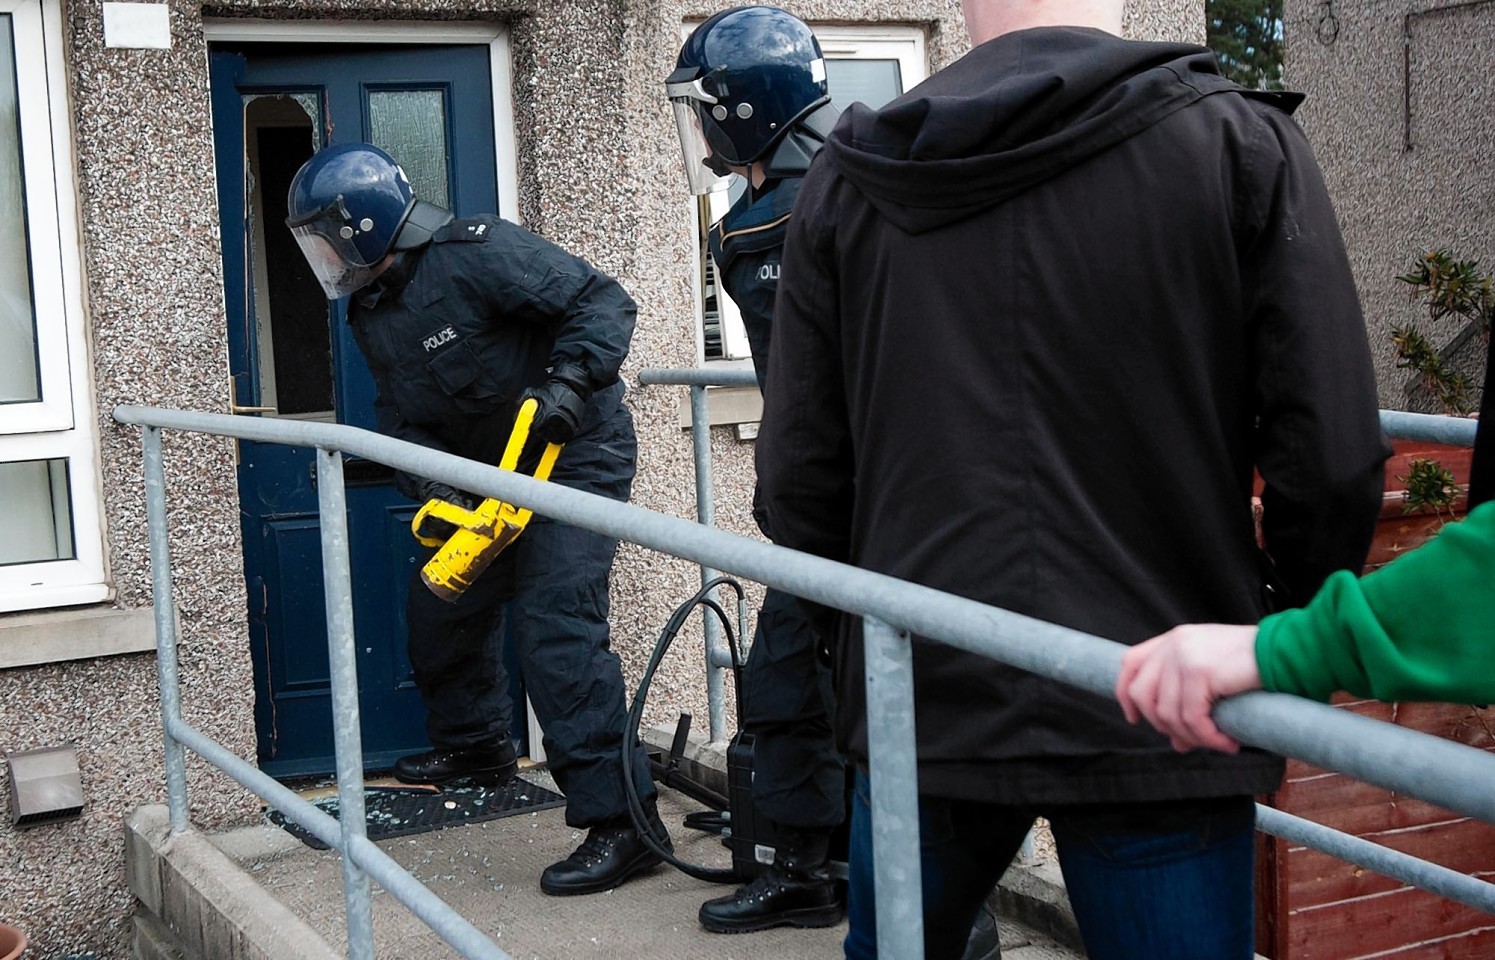 Police in Elgin have carried out a series of raids on houses in the area